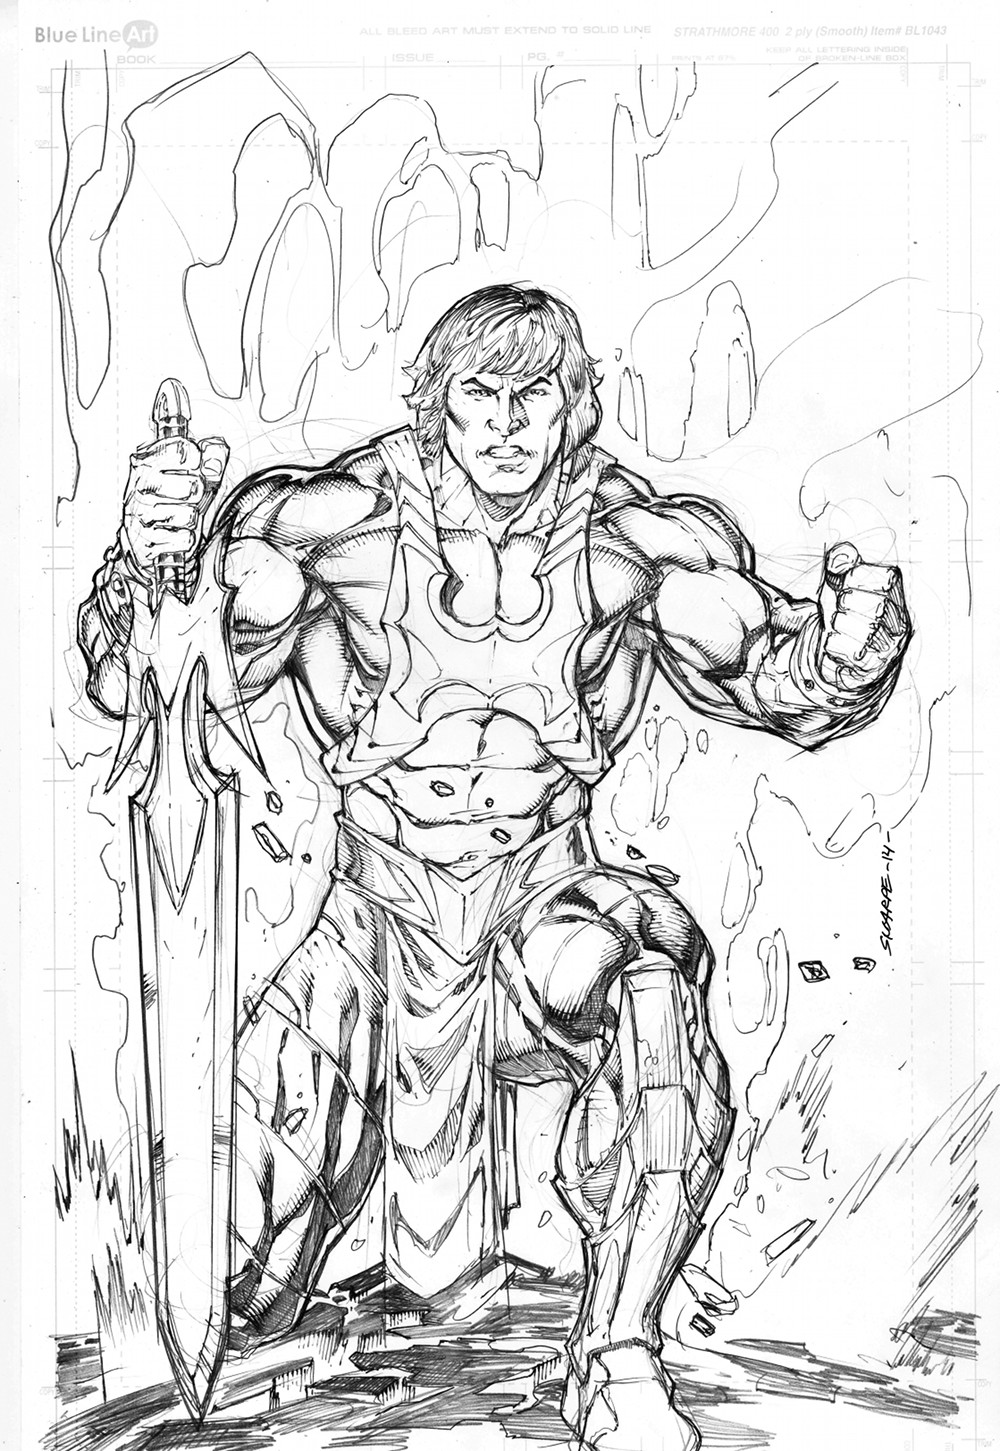 New 52 he-man by Kevin-Sharpe on DeviantArt